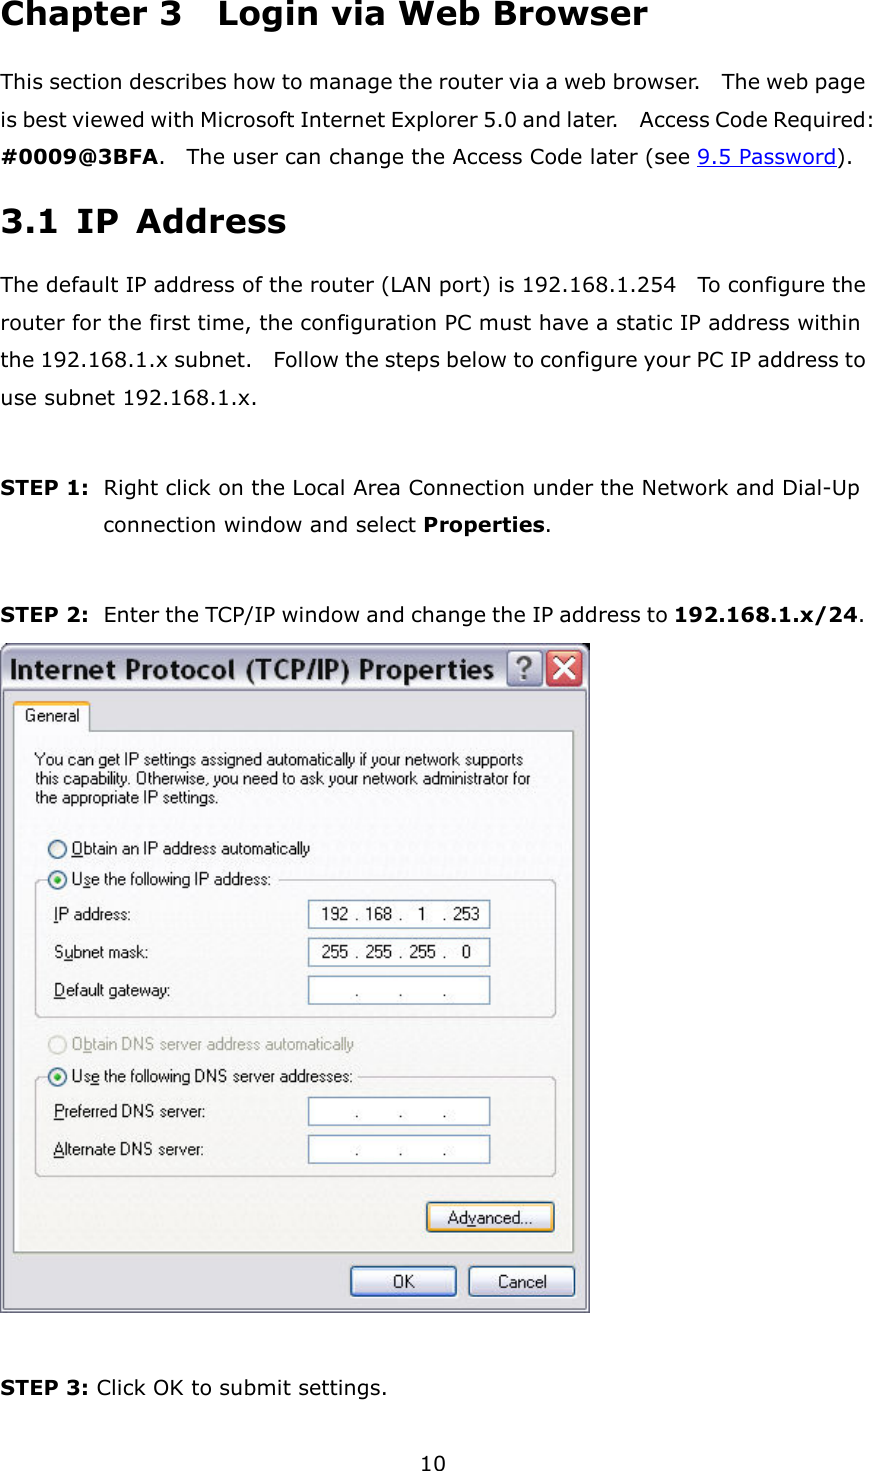 10 Chapter 3    Login via Web Browser This section describes how to manage the router via a web browser.    The web page is best viewed with Microsoft Internet Explorer 5.0 and later.    Access Code Required: #0009@3BFA.    The user can change the Access Code later (see 9.5 Password). 3.1  IP  Address The default IP address of the router (LAN port) is 192.168.1.254    To configure the router for the first time, the configuration PC must have a static IP address within the 192.168.1.x subnet.    Follow the steps below to configure your PC IP address to use subnet 192.168.1.x.  STEP 1:   Right click on the Local Area Connection under the Network and Dial-Up connection window and select Properties.  STEP 2:   Enter the TCP/IP window and change the IP address to 192.168.1.x/24.       STEP 3: Click OK to submit settings. 